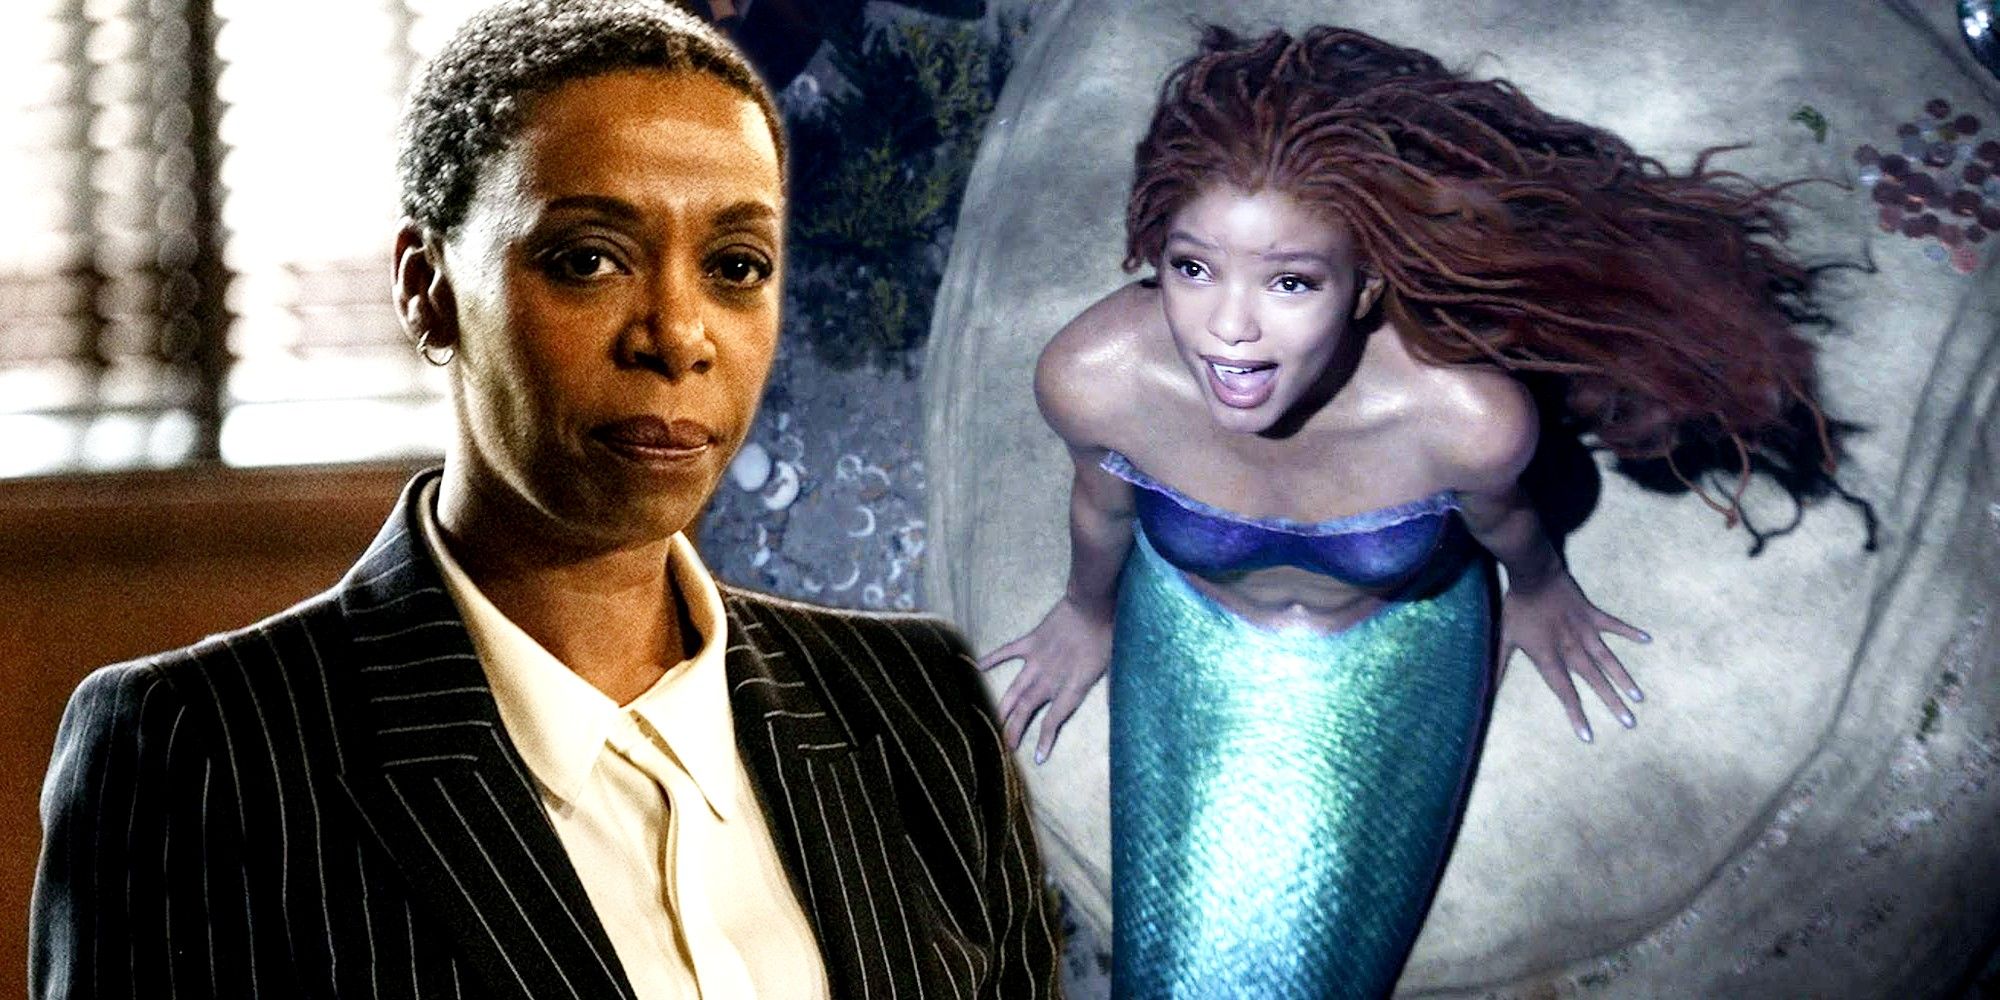 A blended image of Noma Dumezweni and Halle Bailey as Ariel